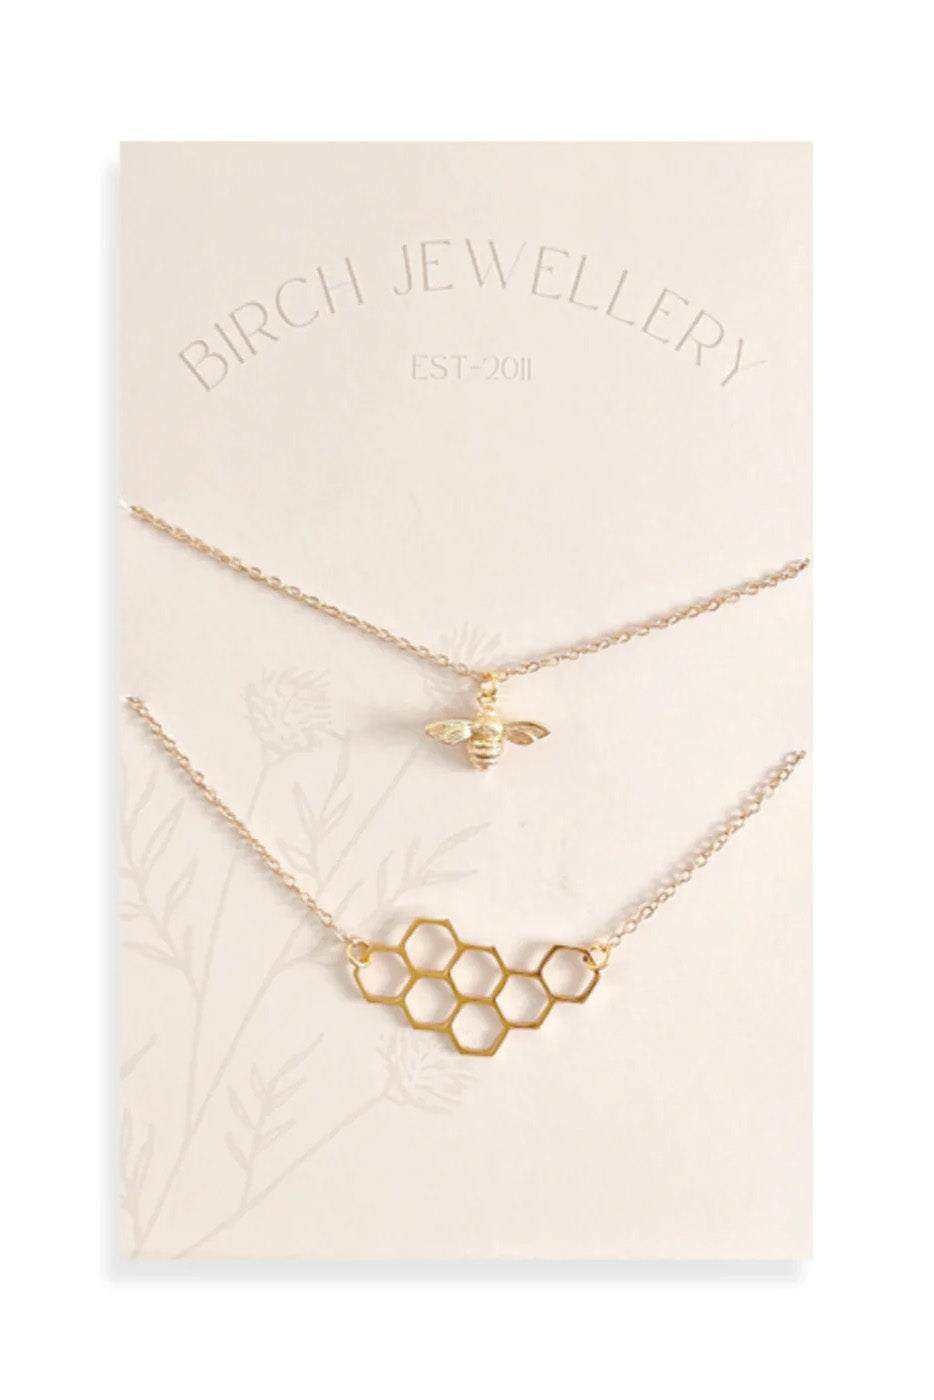 Bee and Honeycomb Layering Set by Birch Jewellery, Gold, made in Ottawa